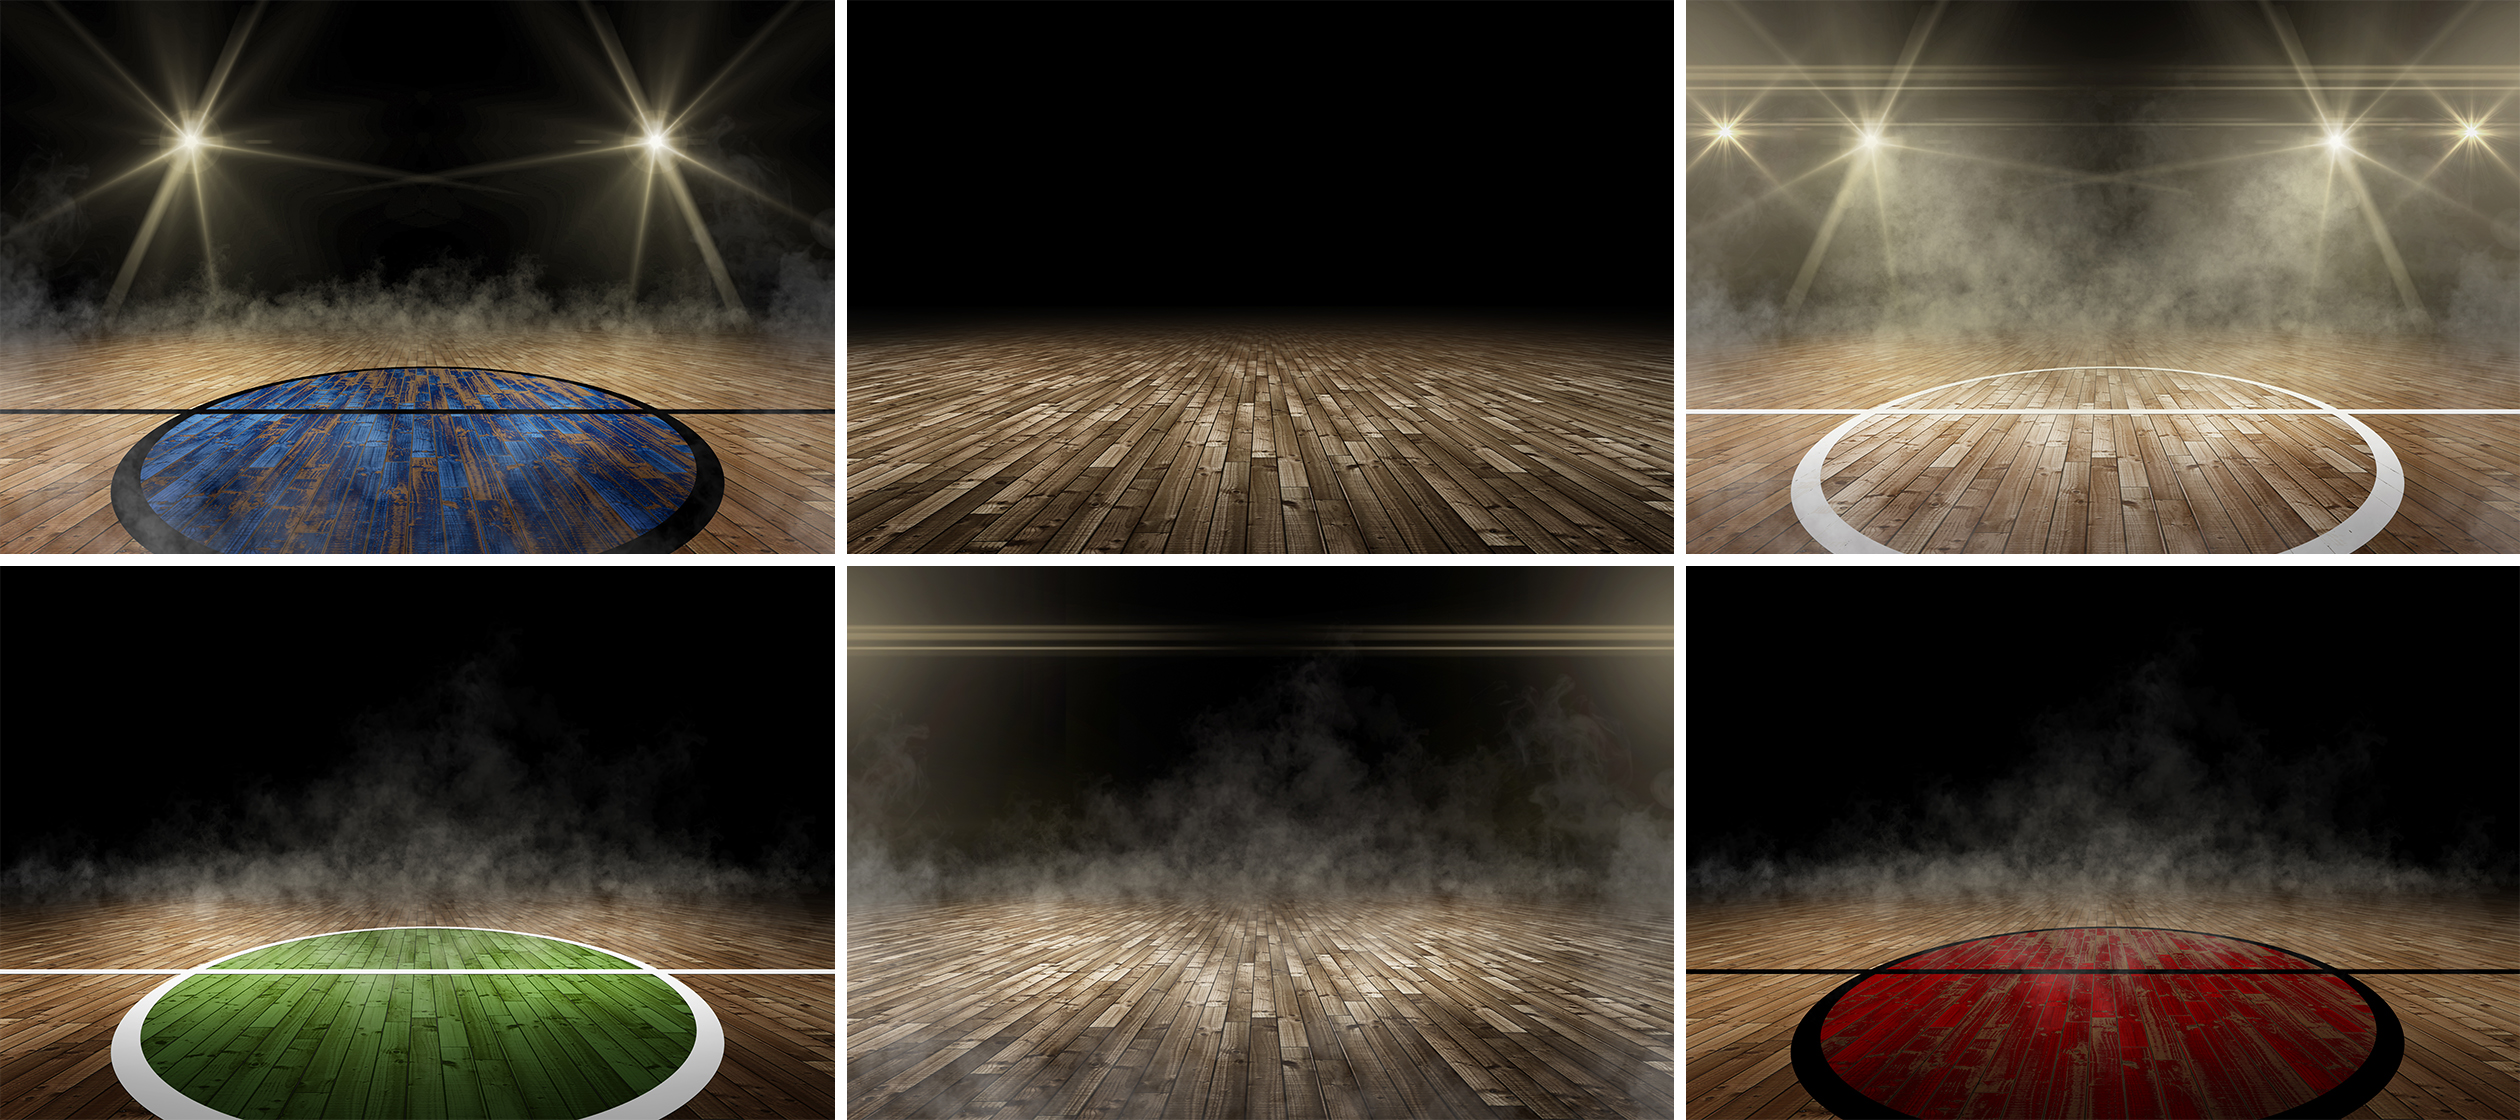 Free Sports Backgrounds For Photoshop - foodslopte